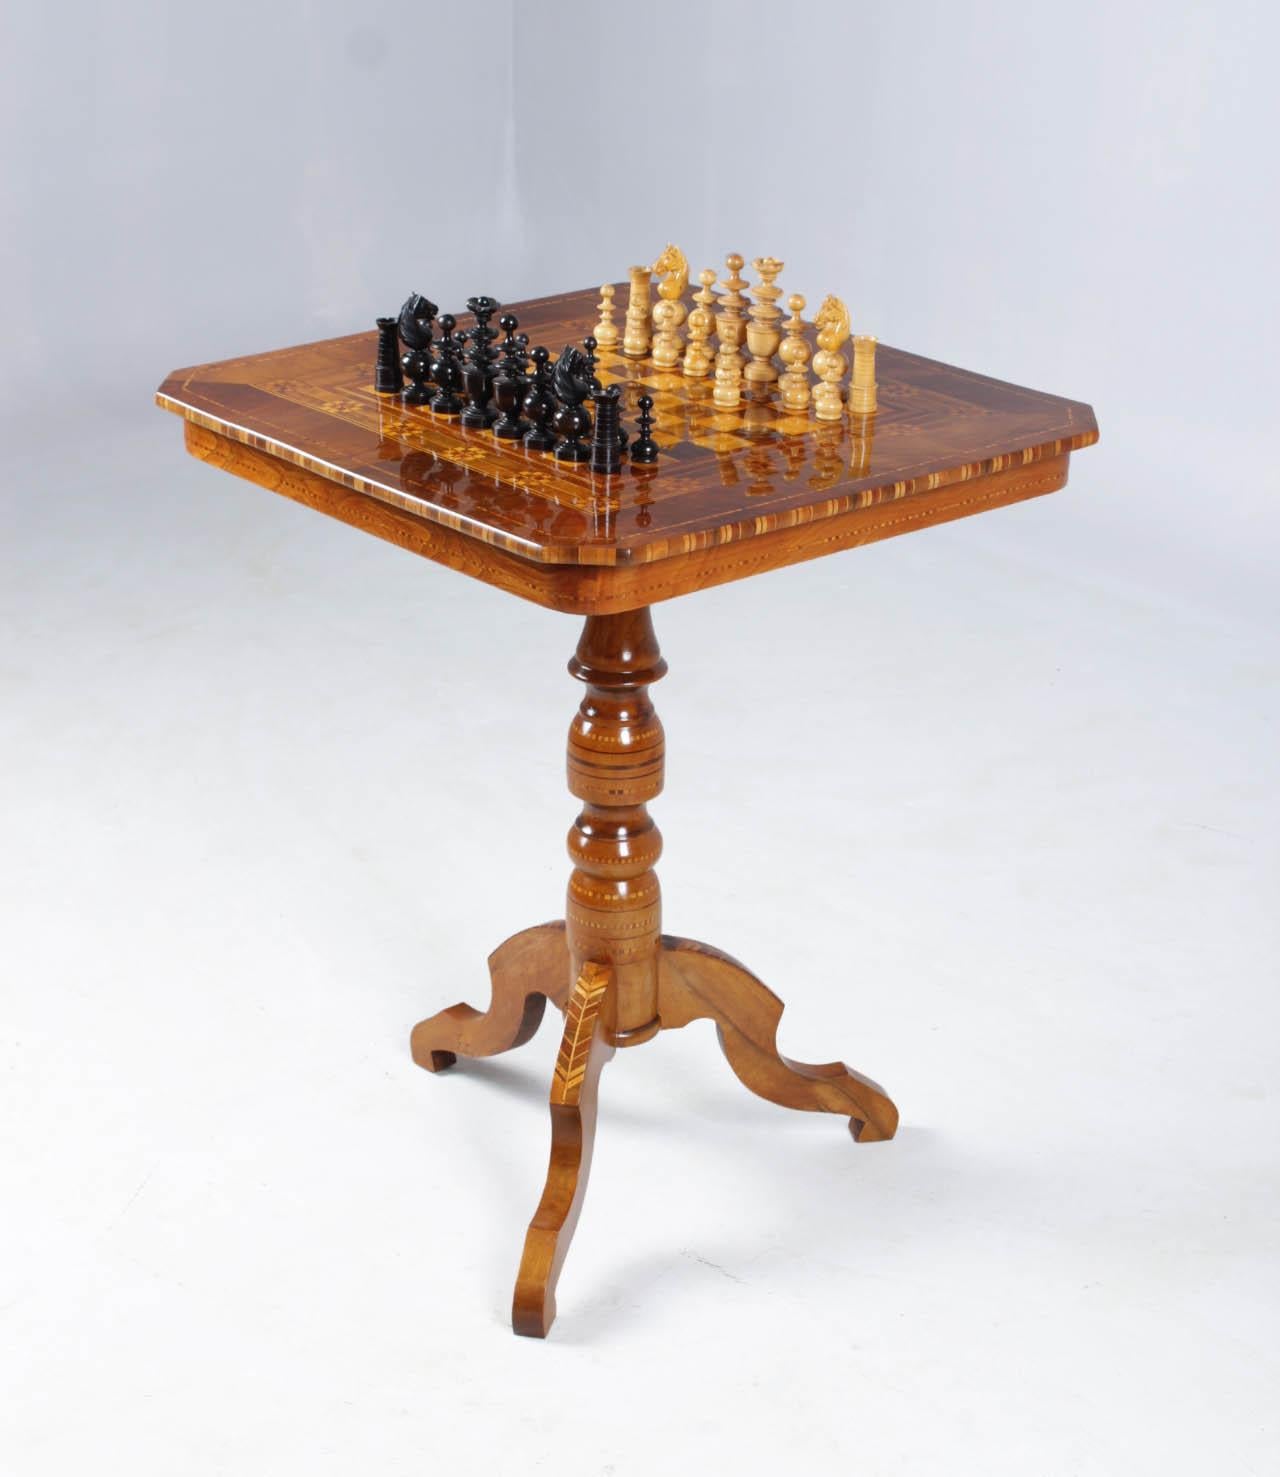 Italian 19th Century Antique Chess Table, Walnut, Italy circa 1850, Without Chess Pieces